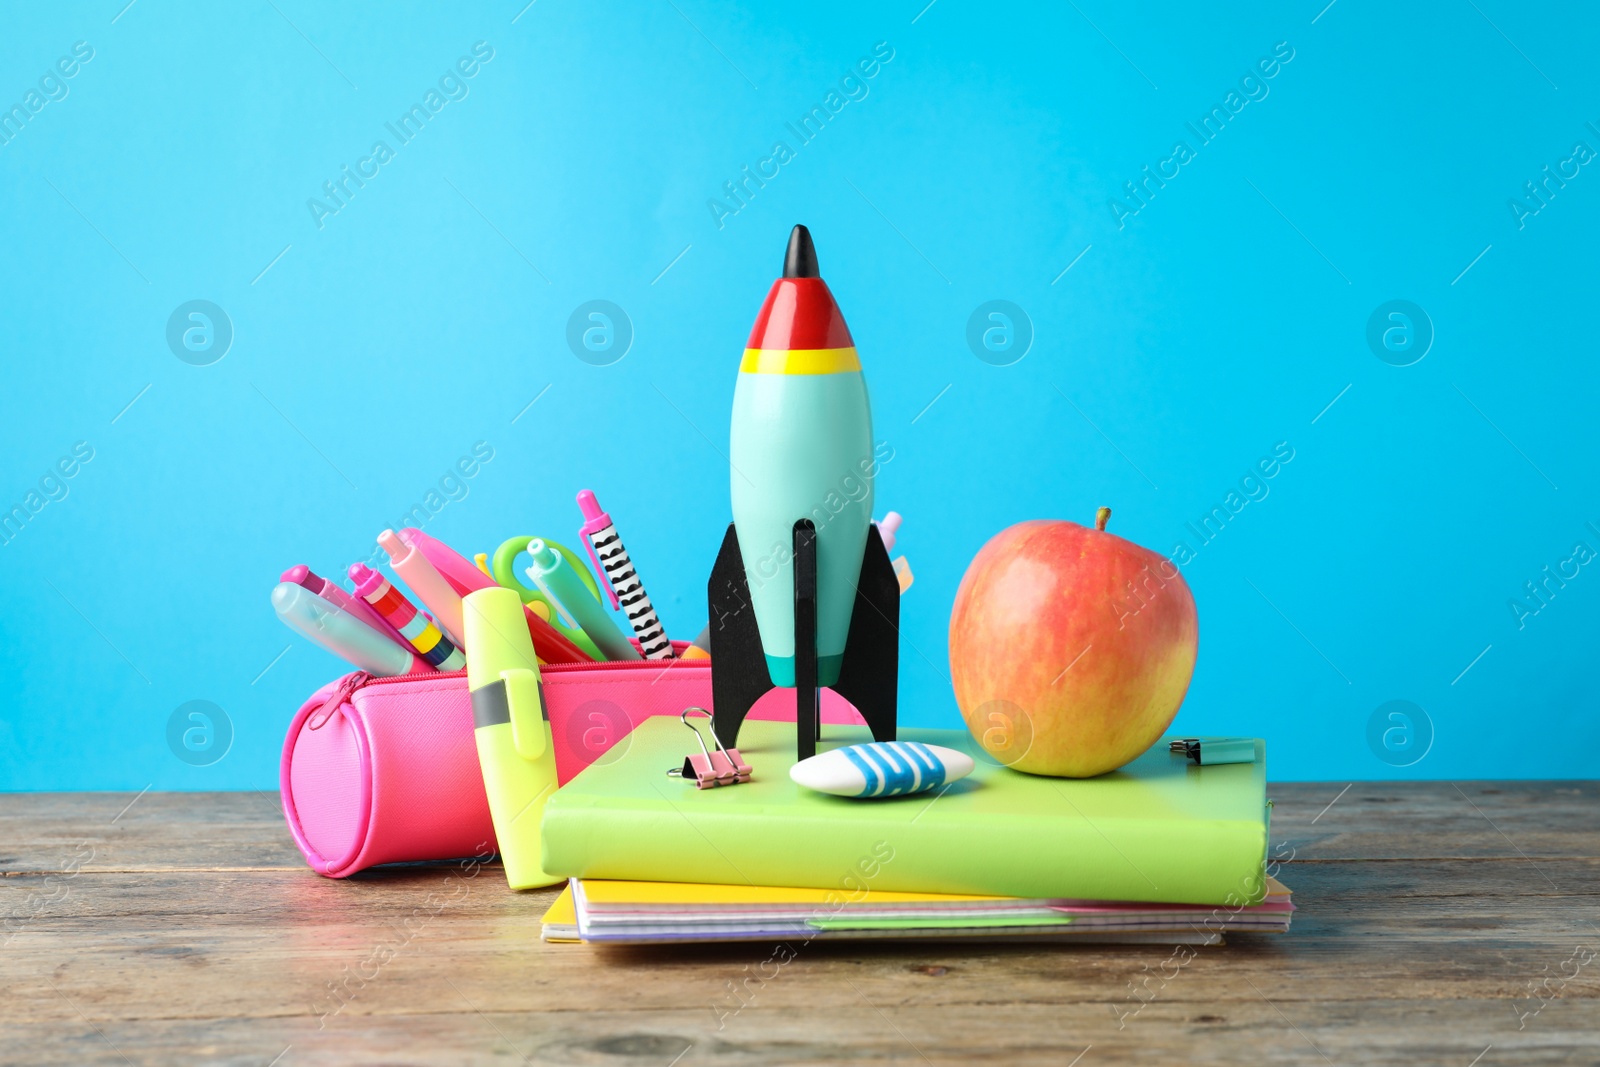 Photo of Bright toy rocket and school supplies on wooden table